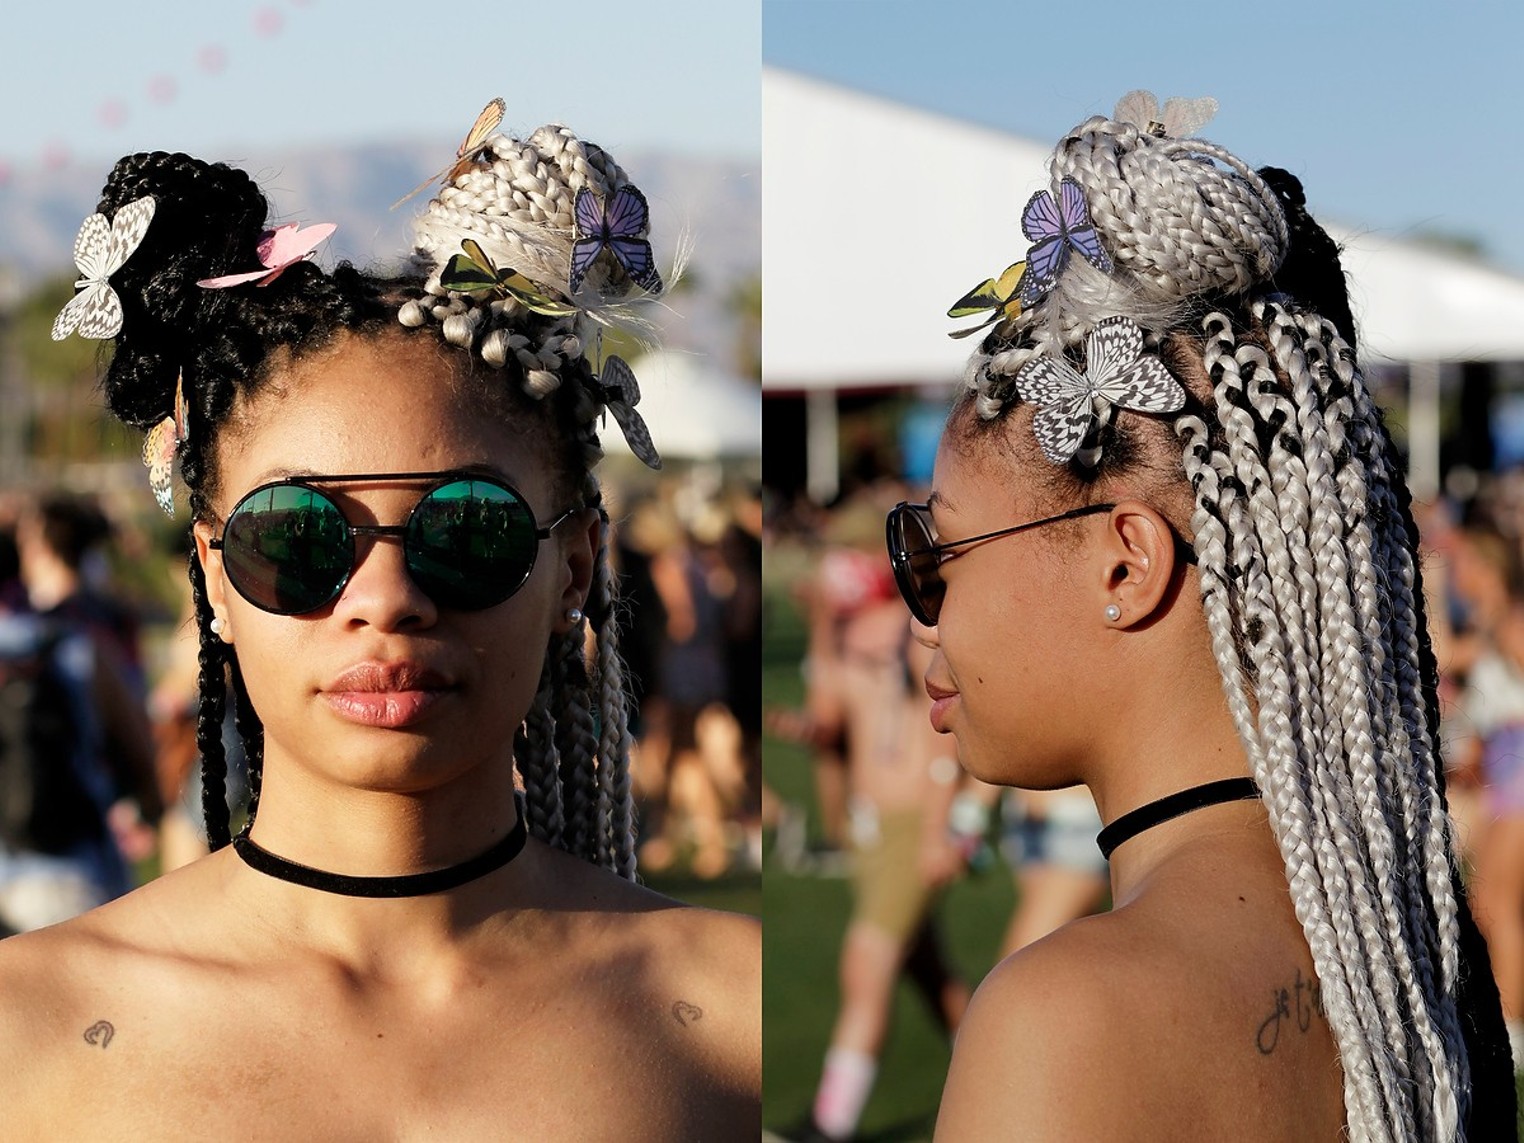 Wildest Hairstyles at Coachella 2016 | Dallas | Dallas Observer | The  Leading Independent News Source in Dallas, Texas